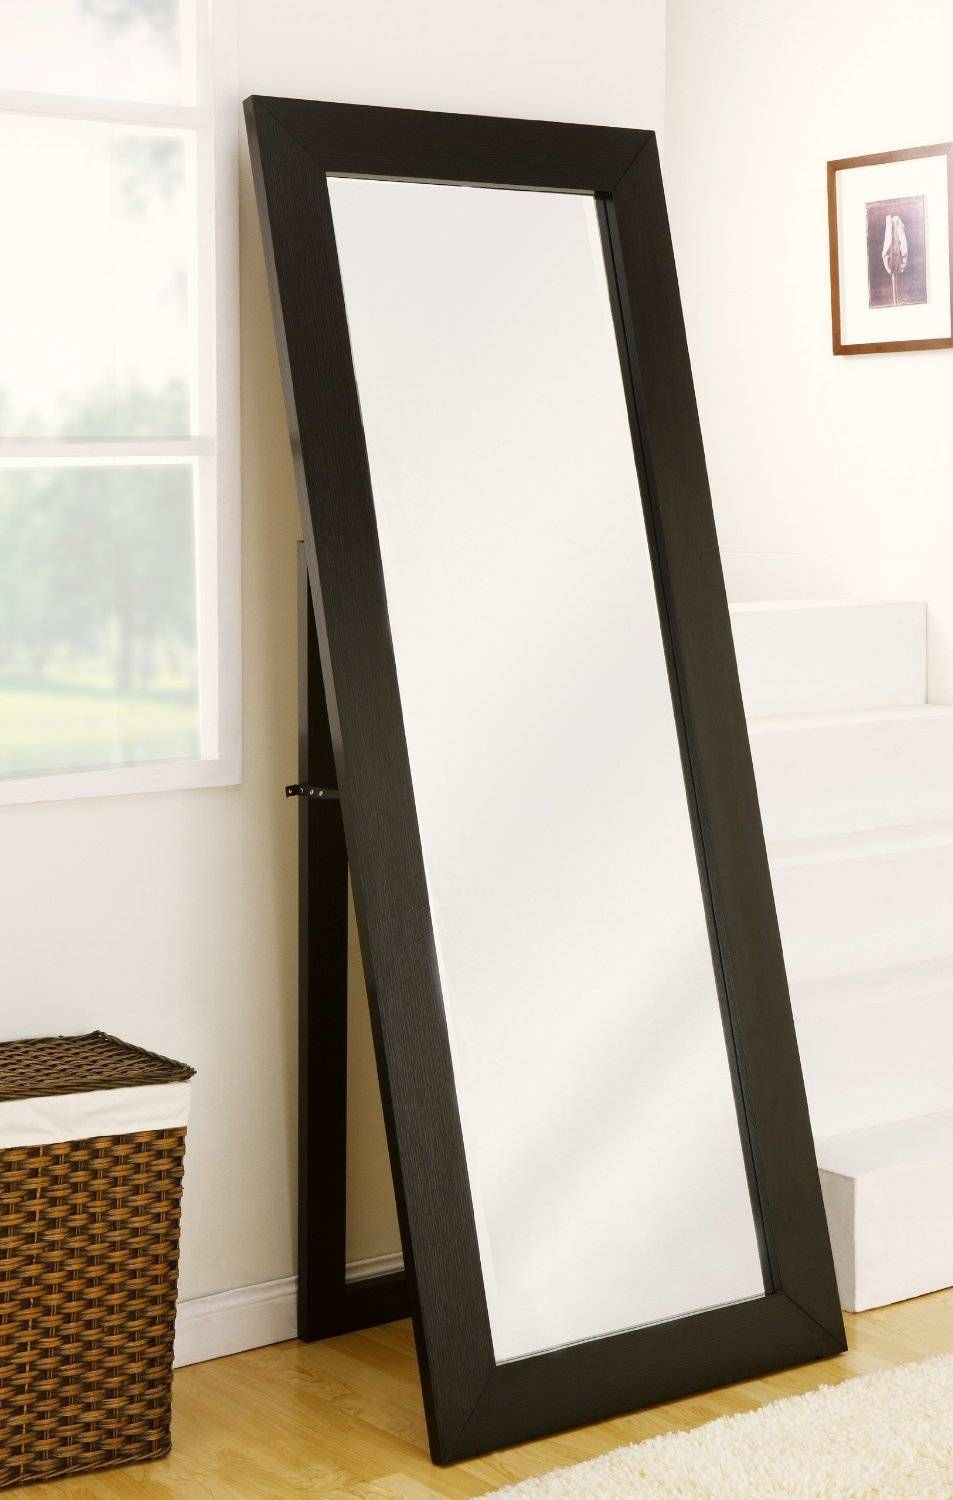 Free Standing Mirror Full Length 2 Fascinating Ideas On Mirror A With Regard To Free Standing Mirrors (View 10 of 25)